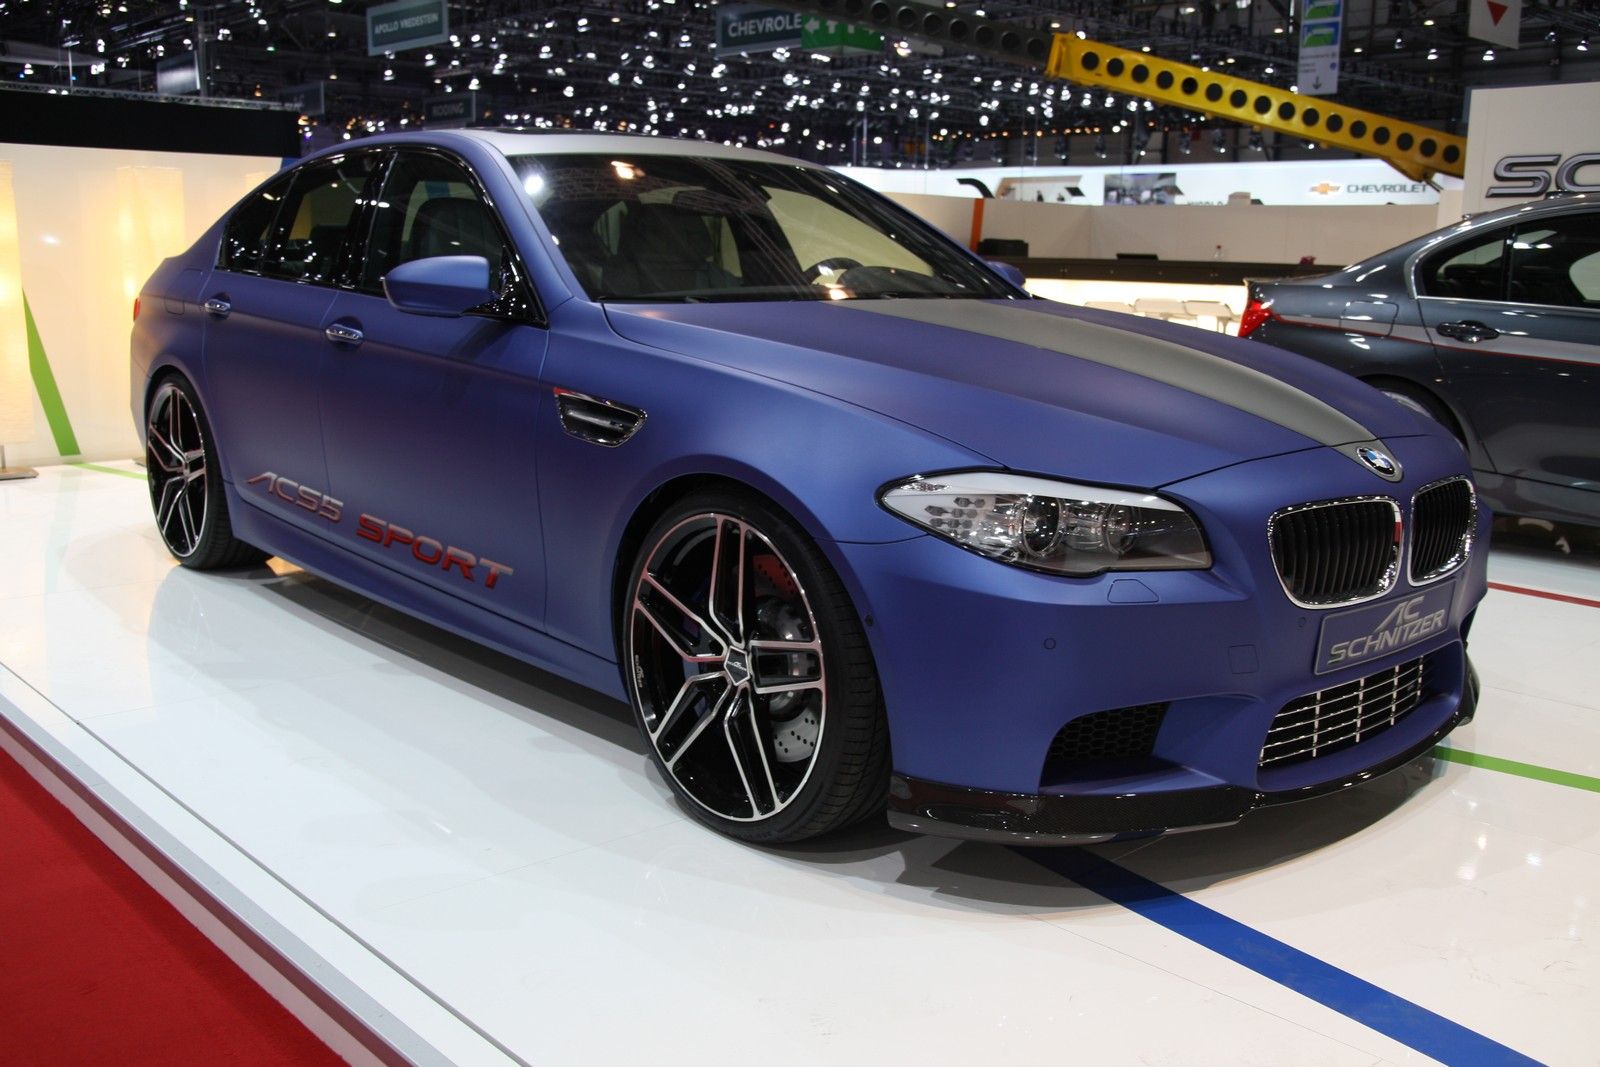 Car Show version of the limited edition M5